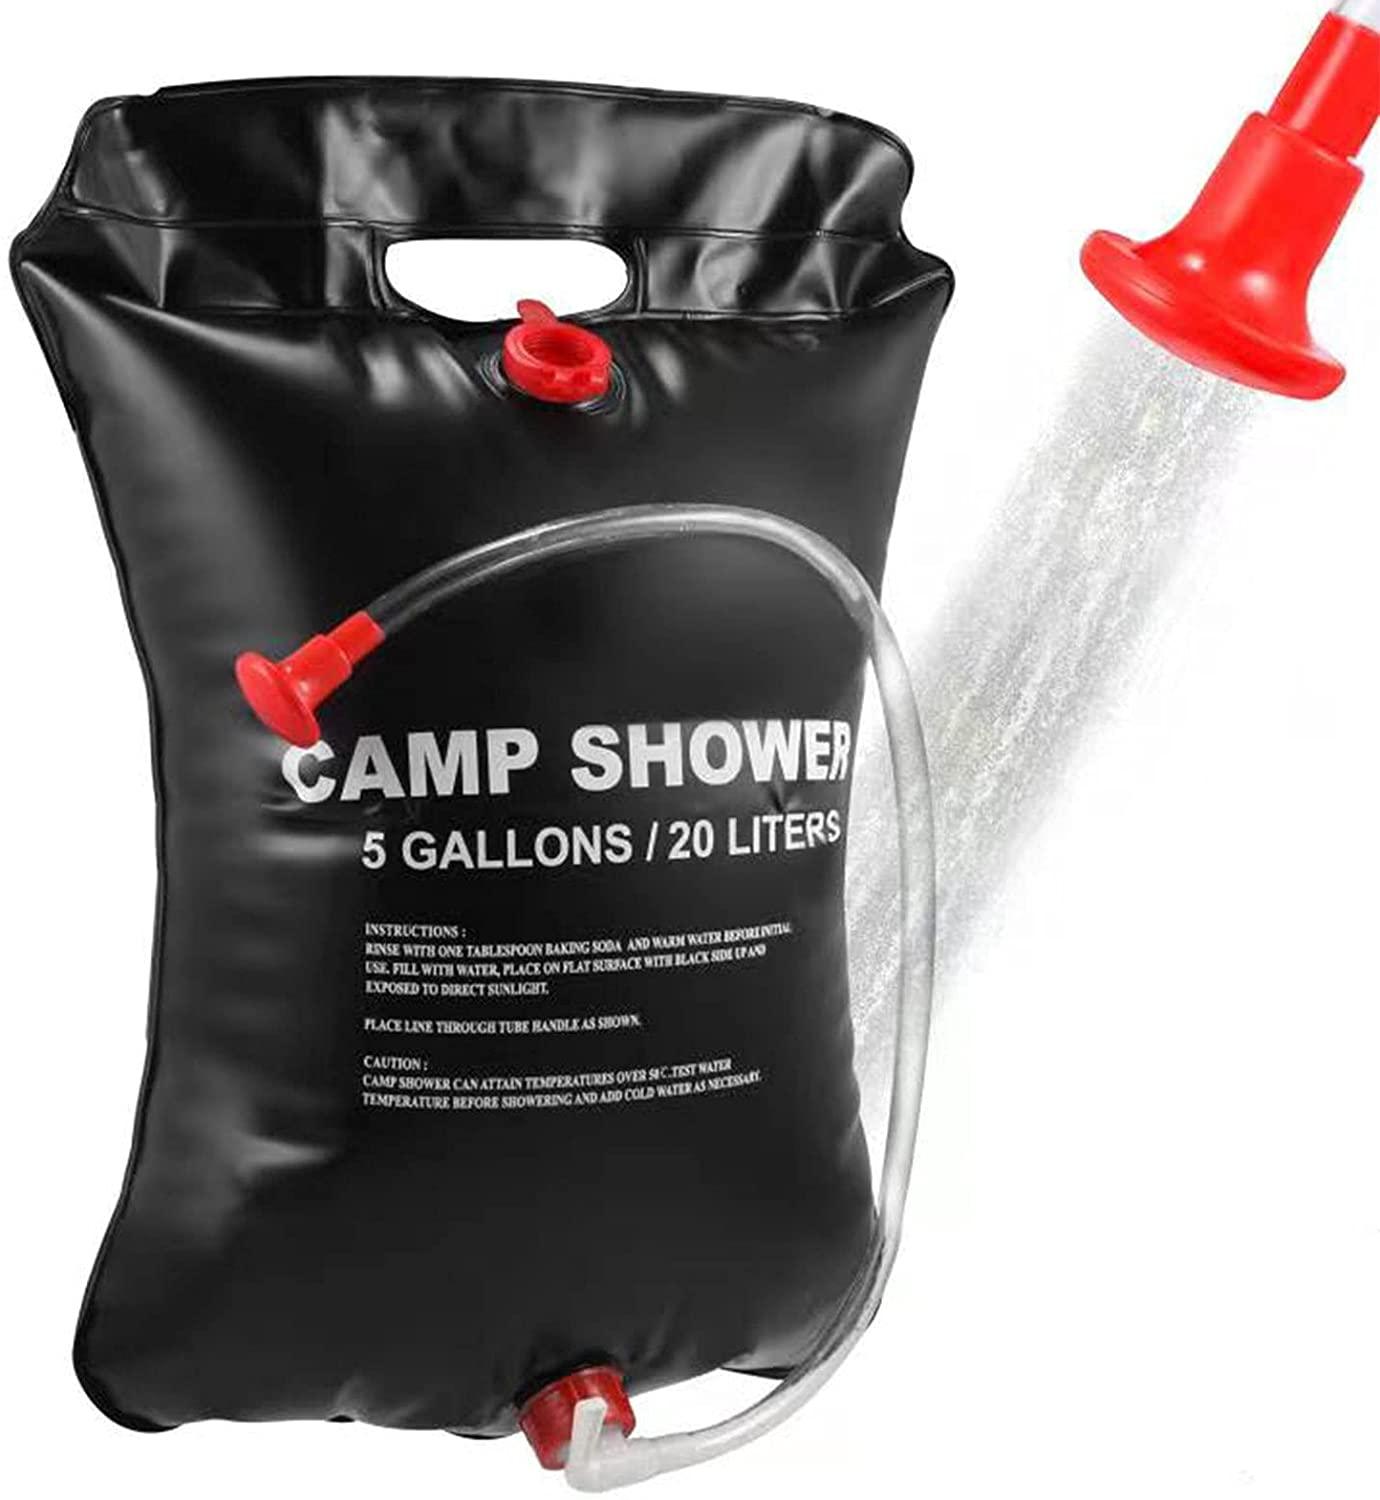 20L Solar Shower Bag, Premium Camping Shower Portable with Shower Head, Hose, Tap Head - Outdoor Solar Showers for camping - Portable Shower Camping (Black) Wintory